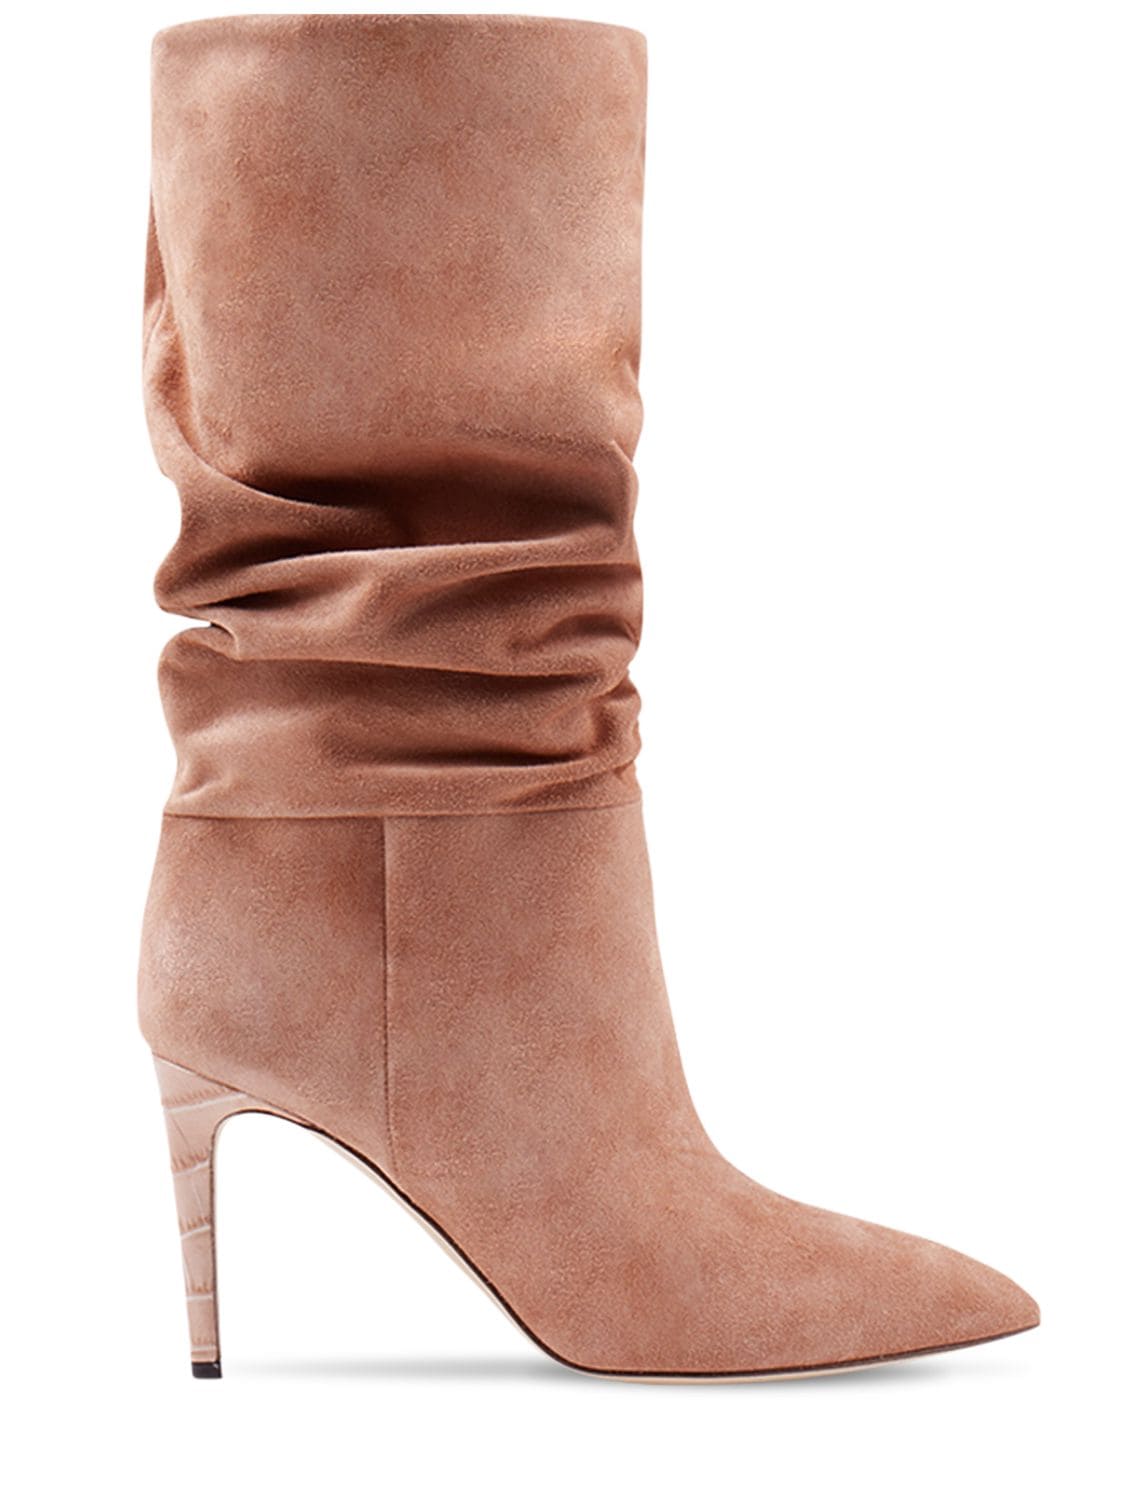 PARIS TEXAS 85MM SLOUCHY SUEDE BOOTS,75ICCL007-U0FIQVJB0